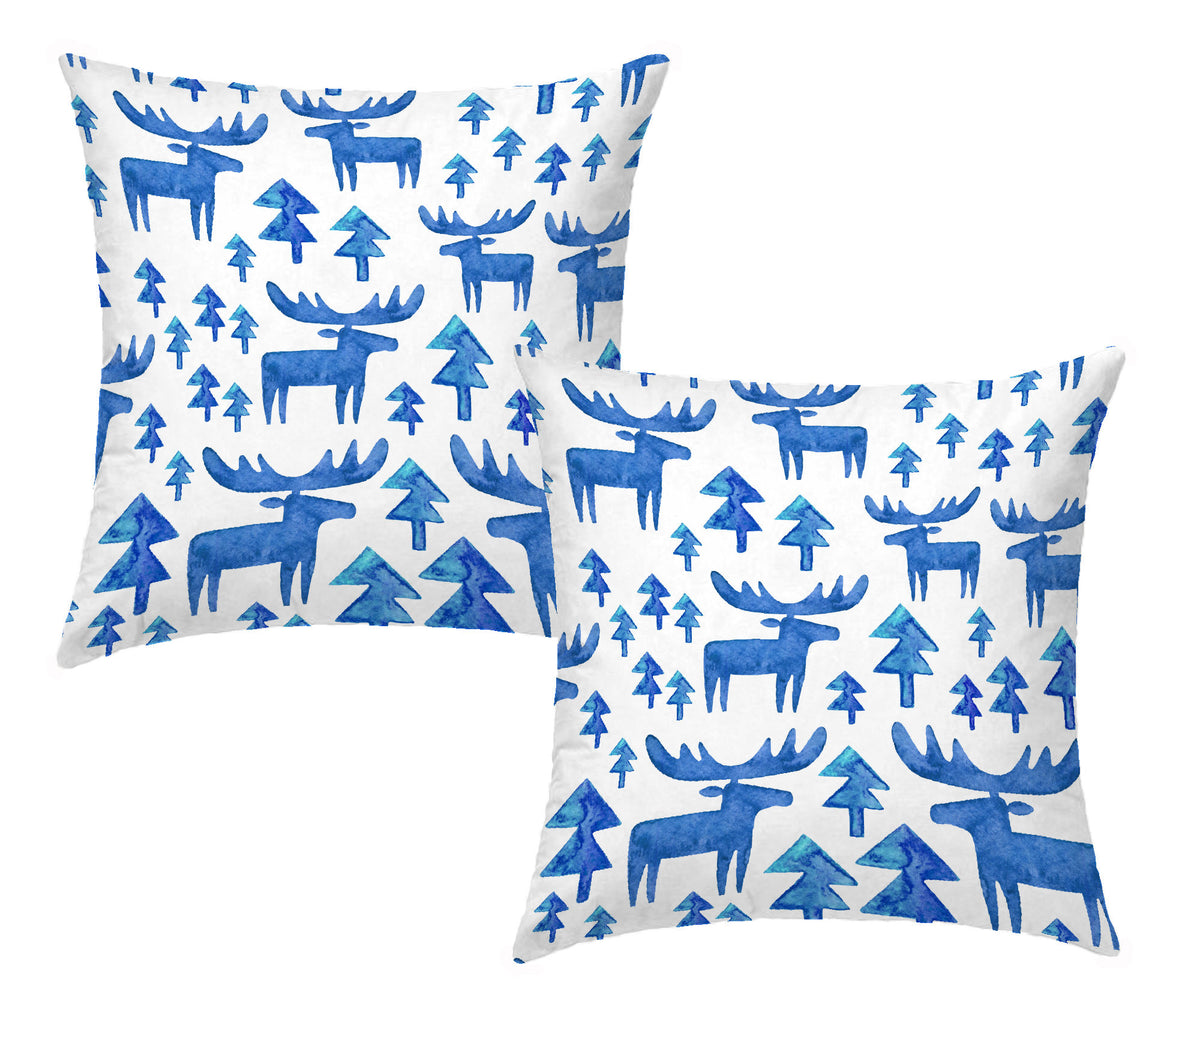 Pair of Cushion Covers for Furniture cm. 40x40 - BLUE REINDEER